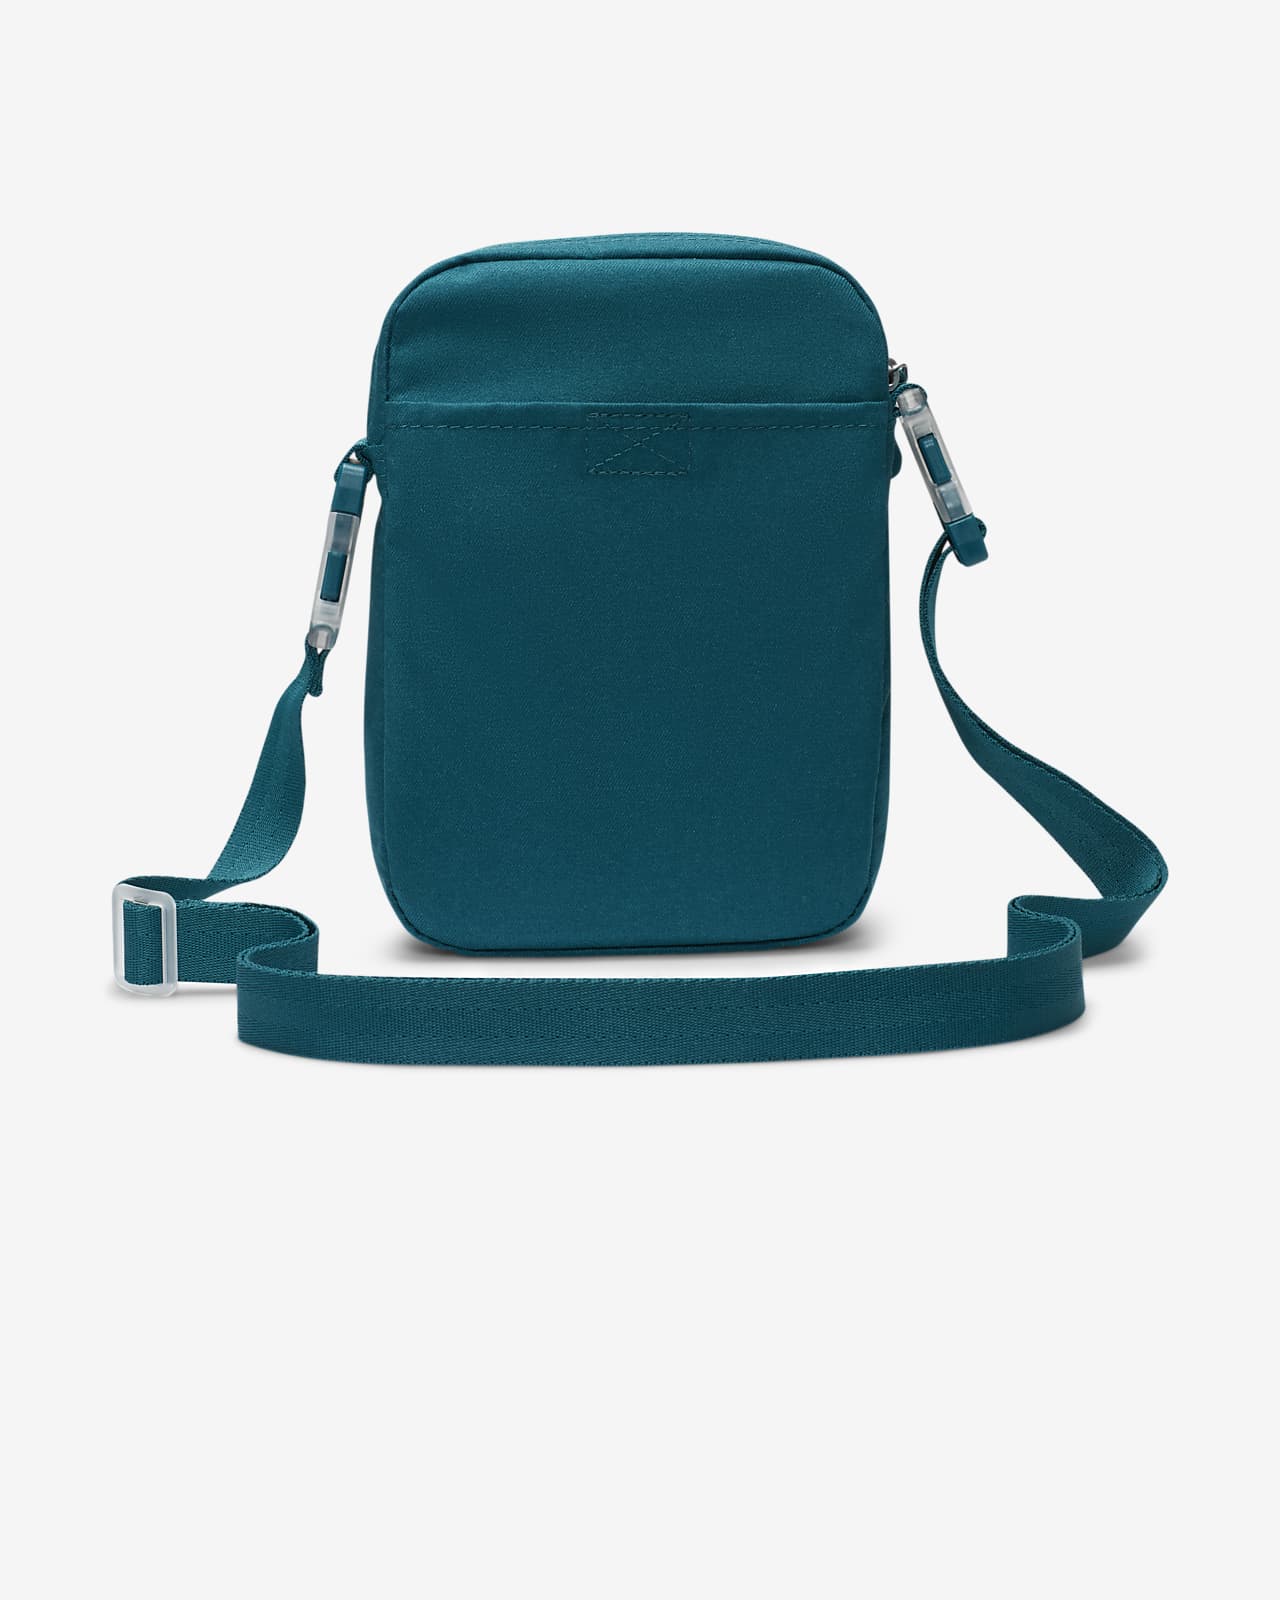 Lacoste Active Daily Crossover Bag - One Size